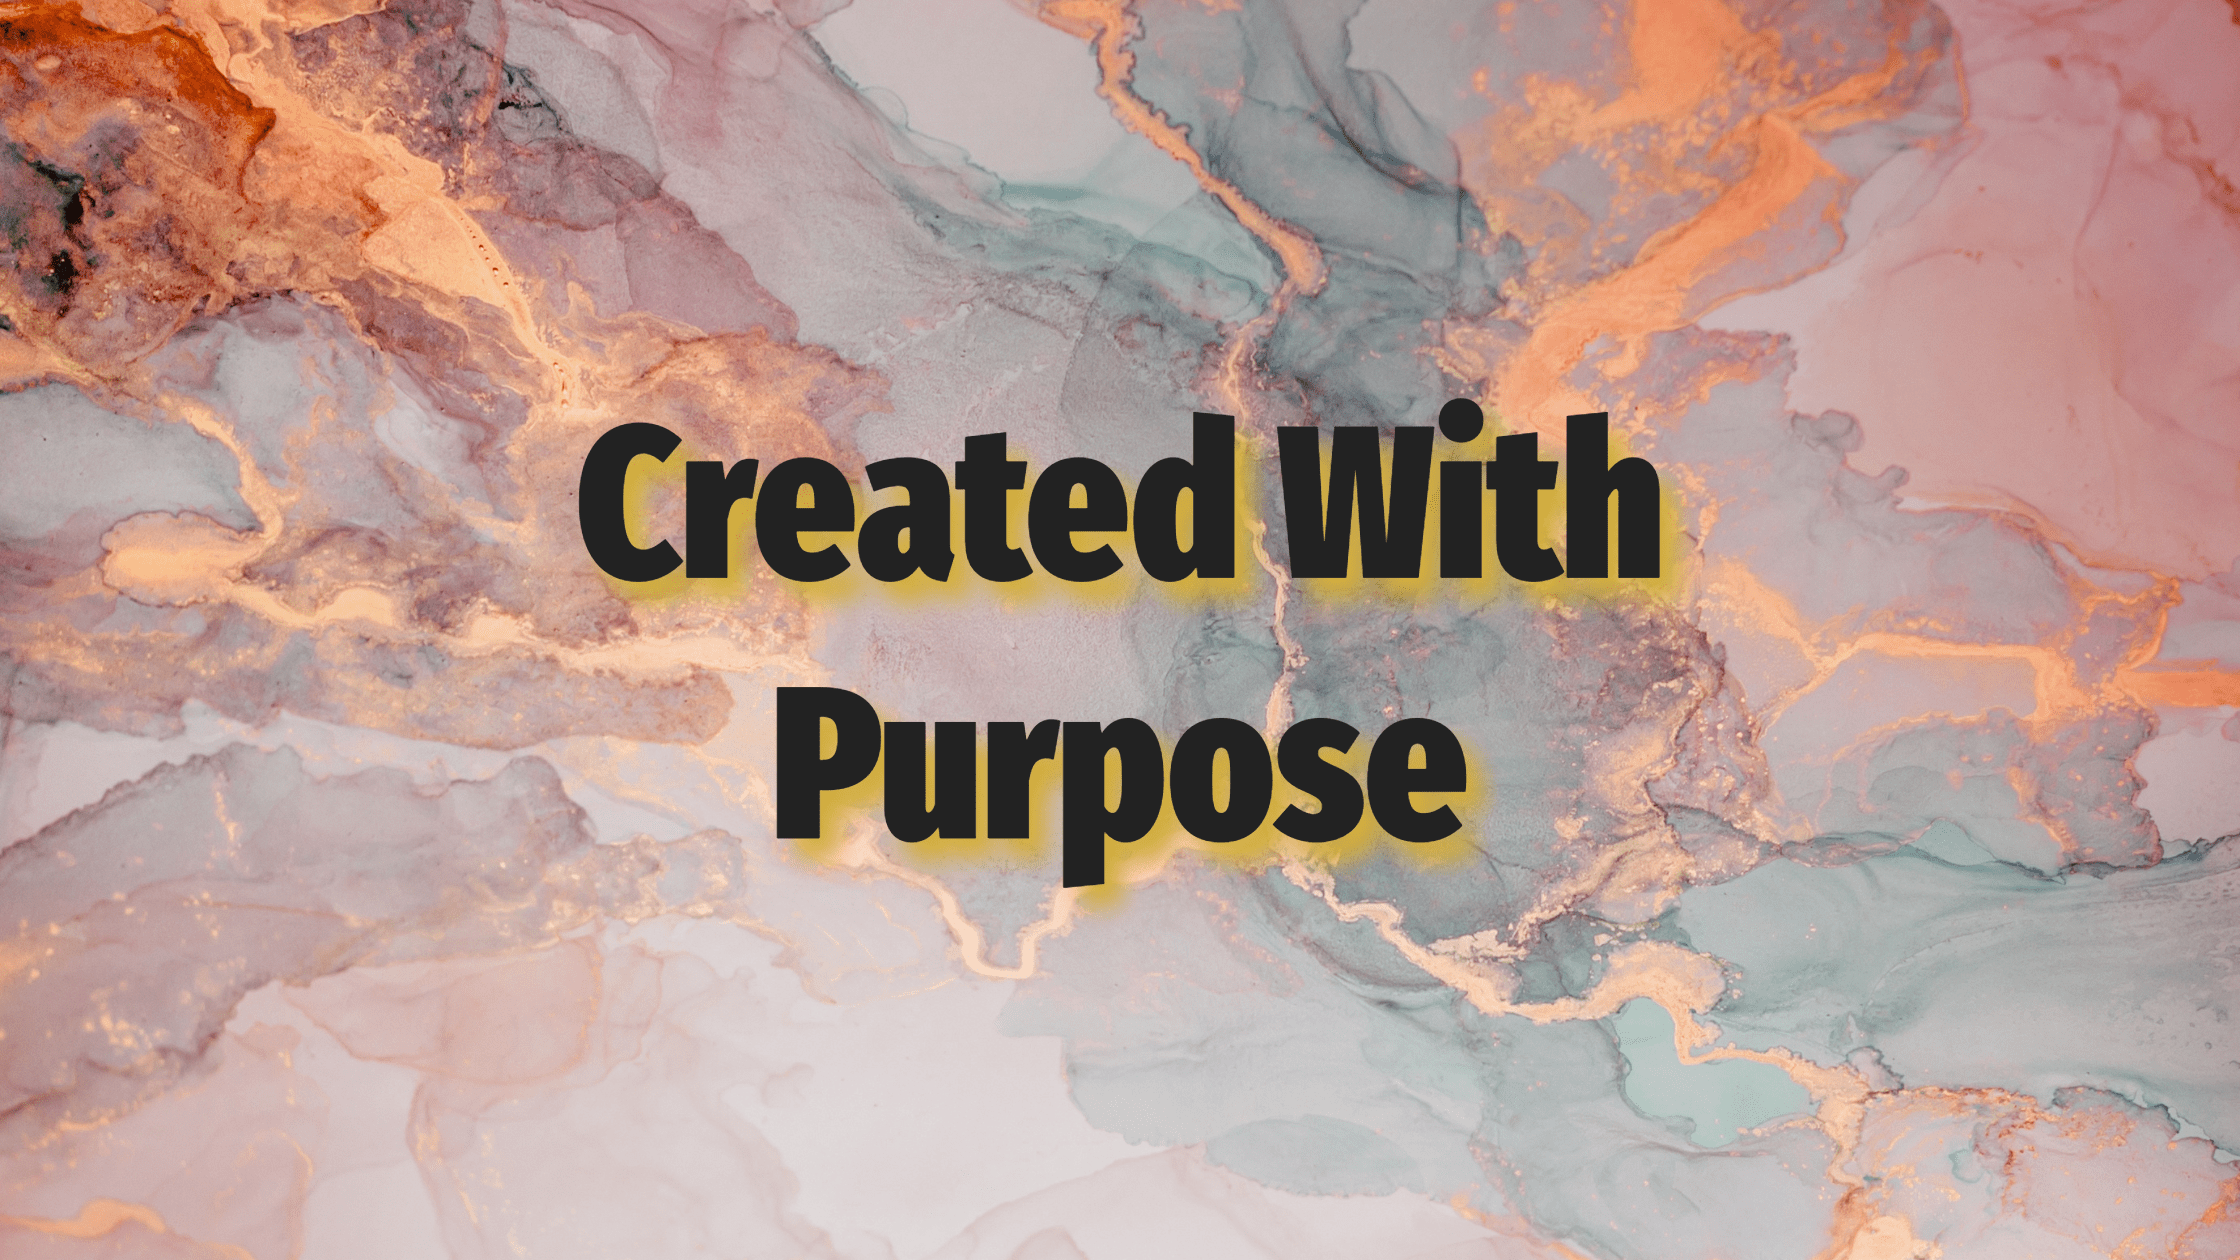 Created with purpose